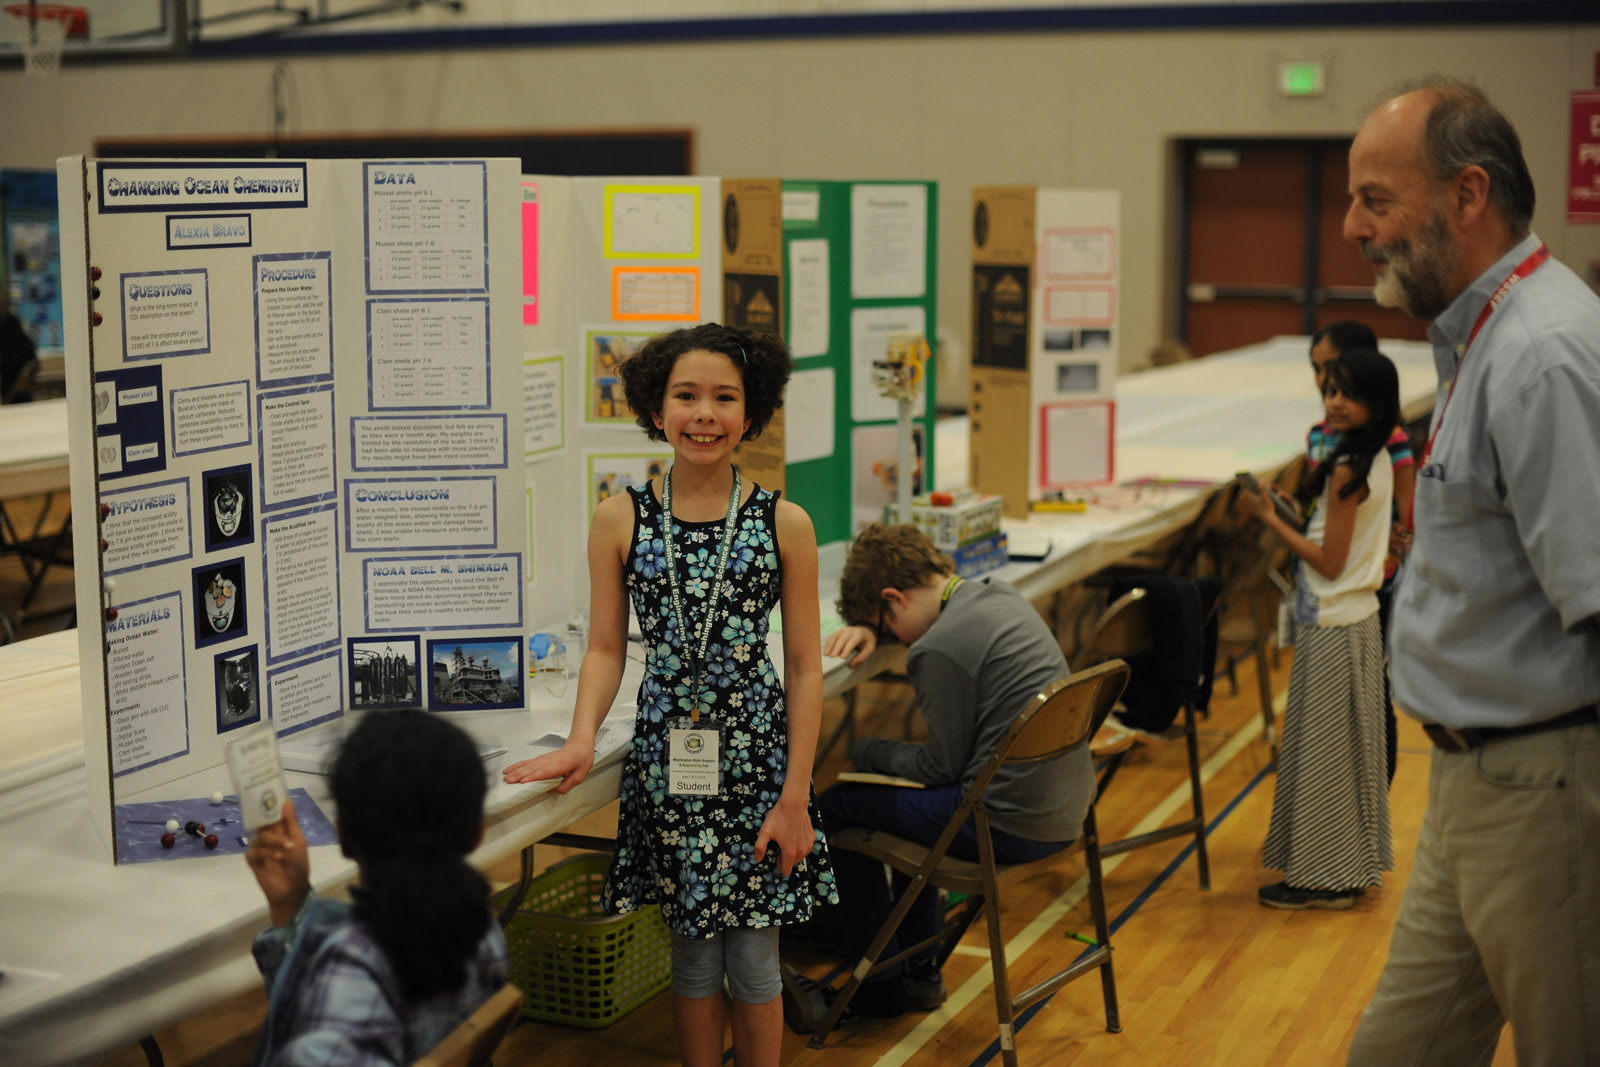 Science Fair 2016-04-01 by Mike Bay D3X 277